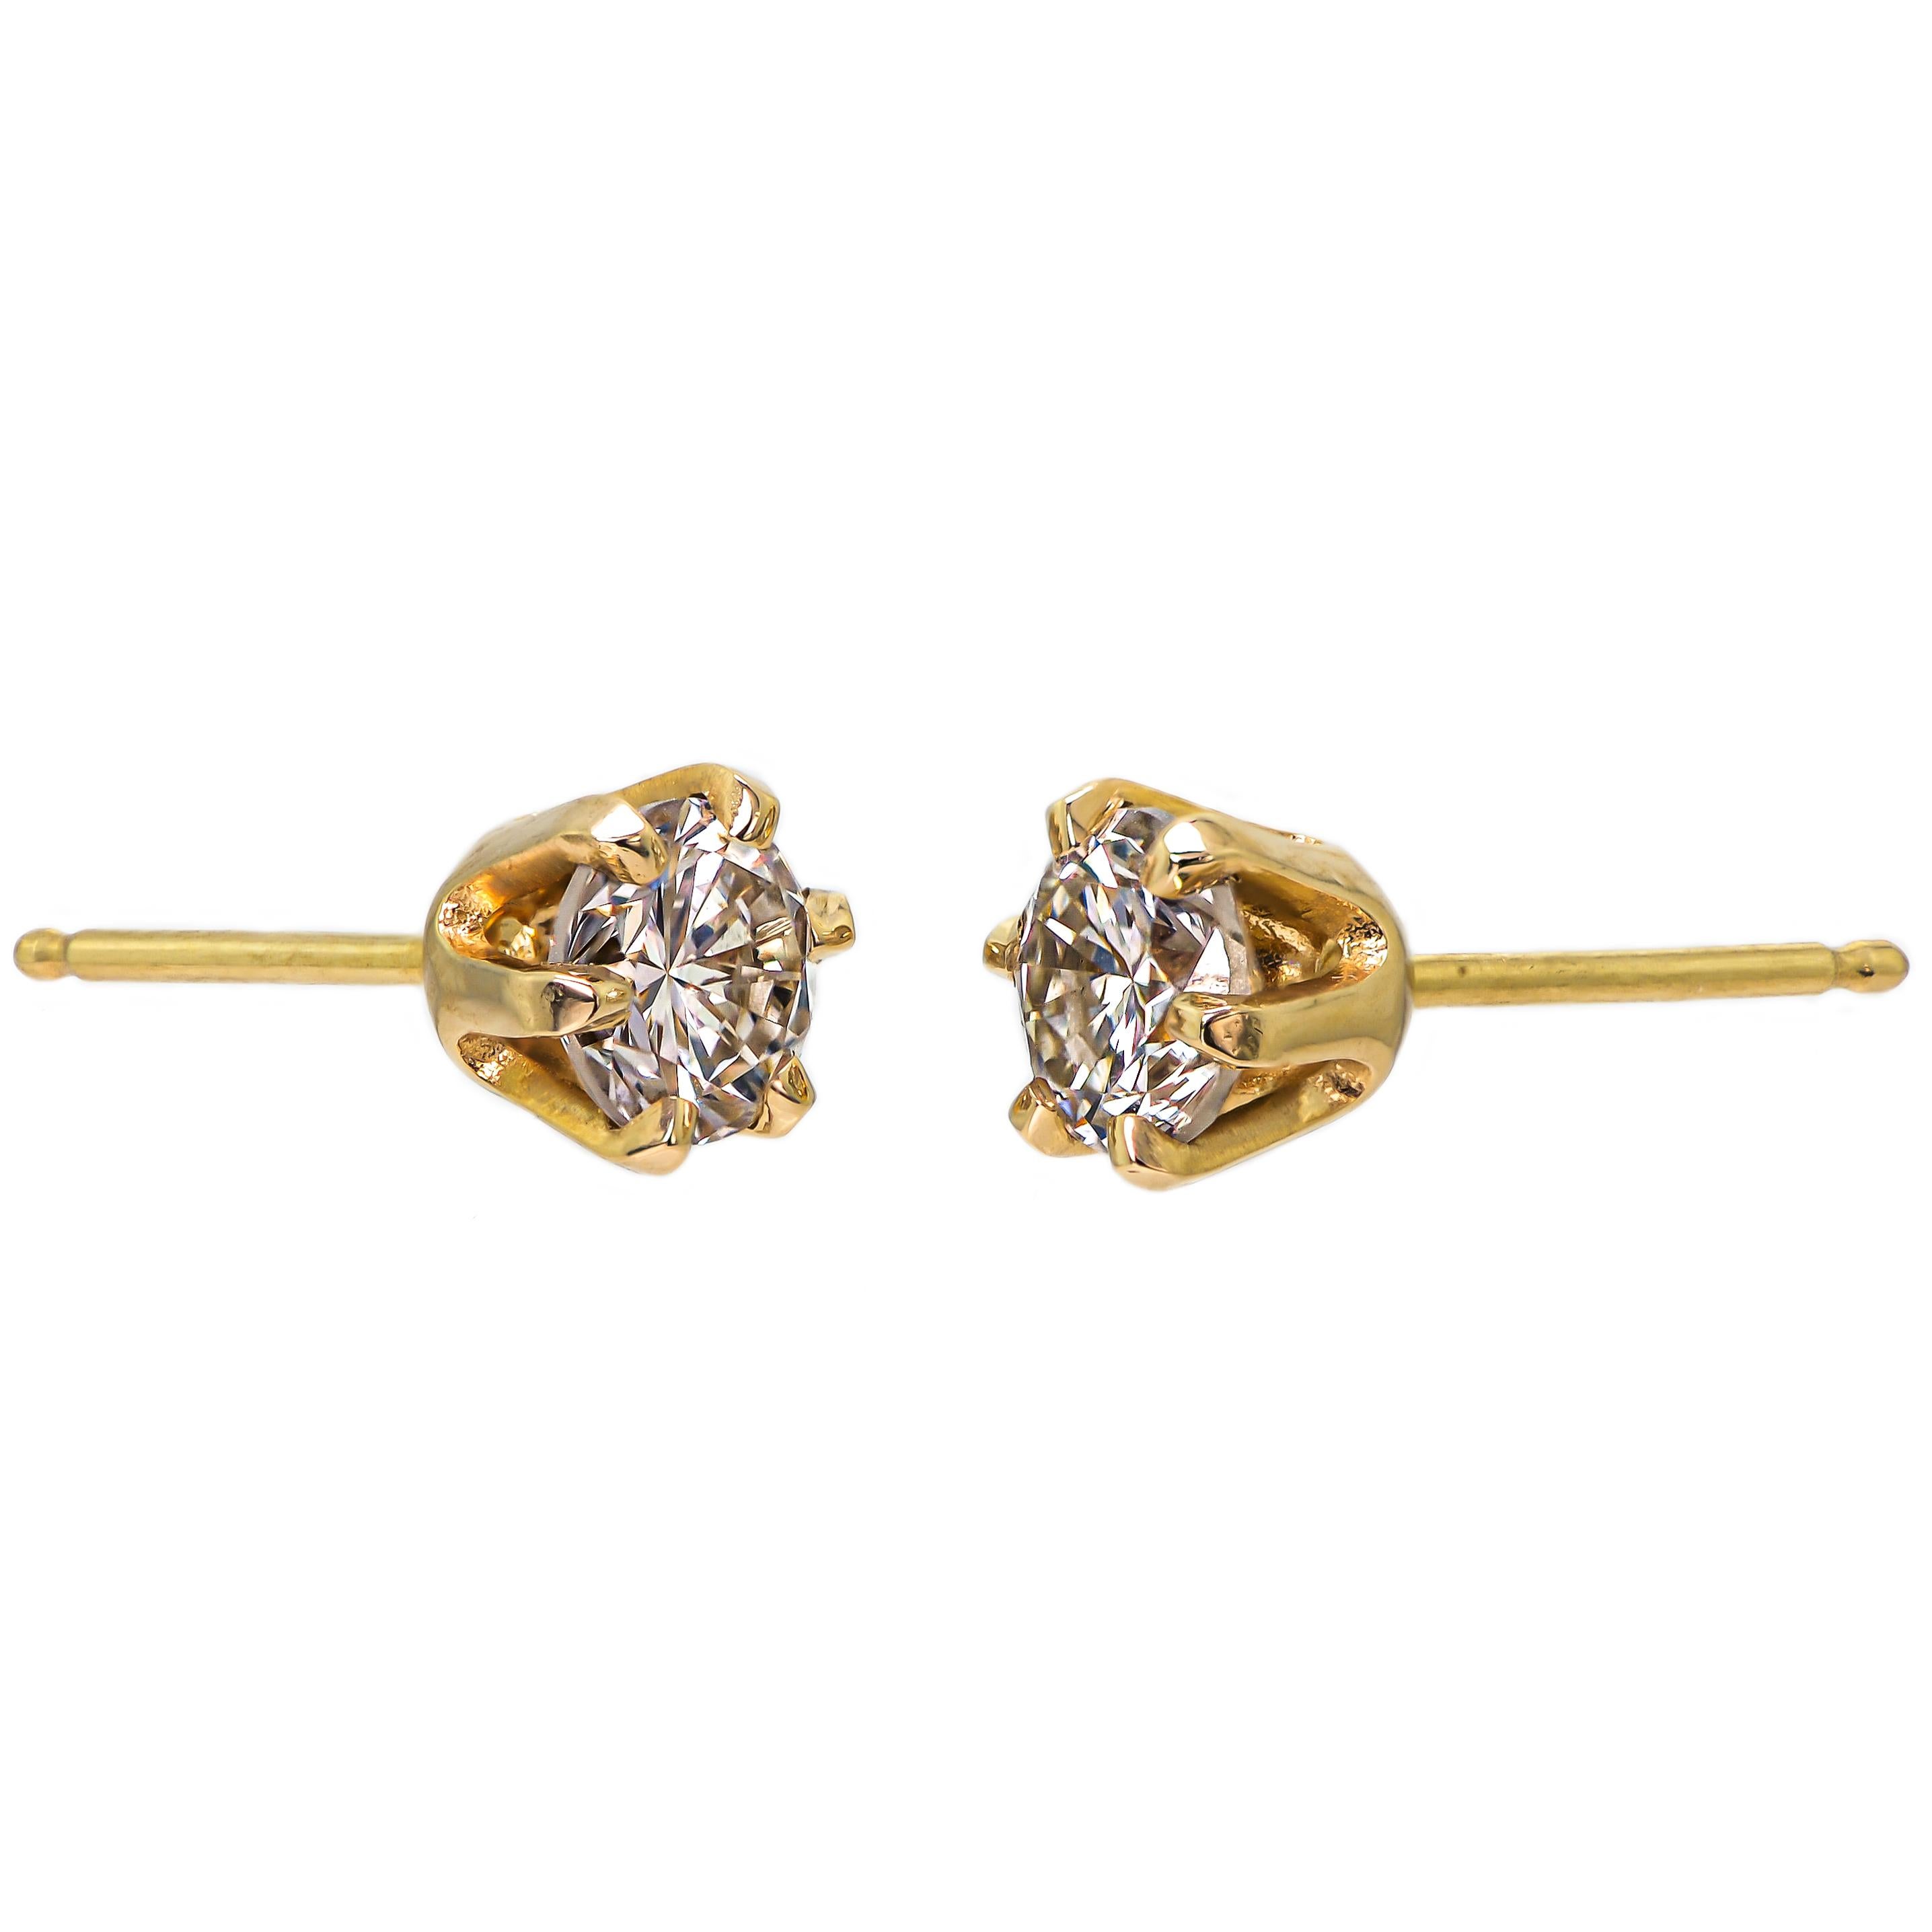 Lovely Pair of Diamond Stud Earrings In Good Condition For Sale In Wheaton, IL